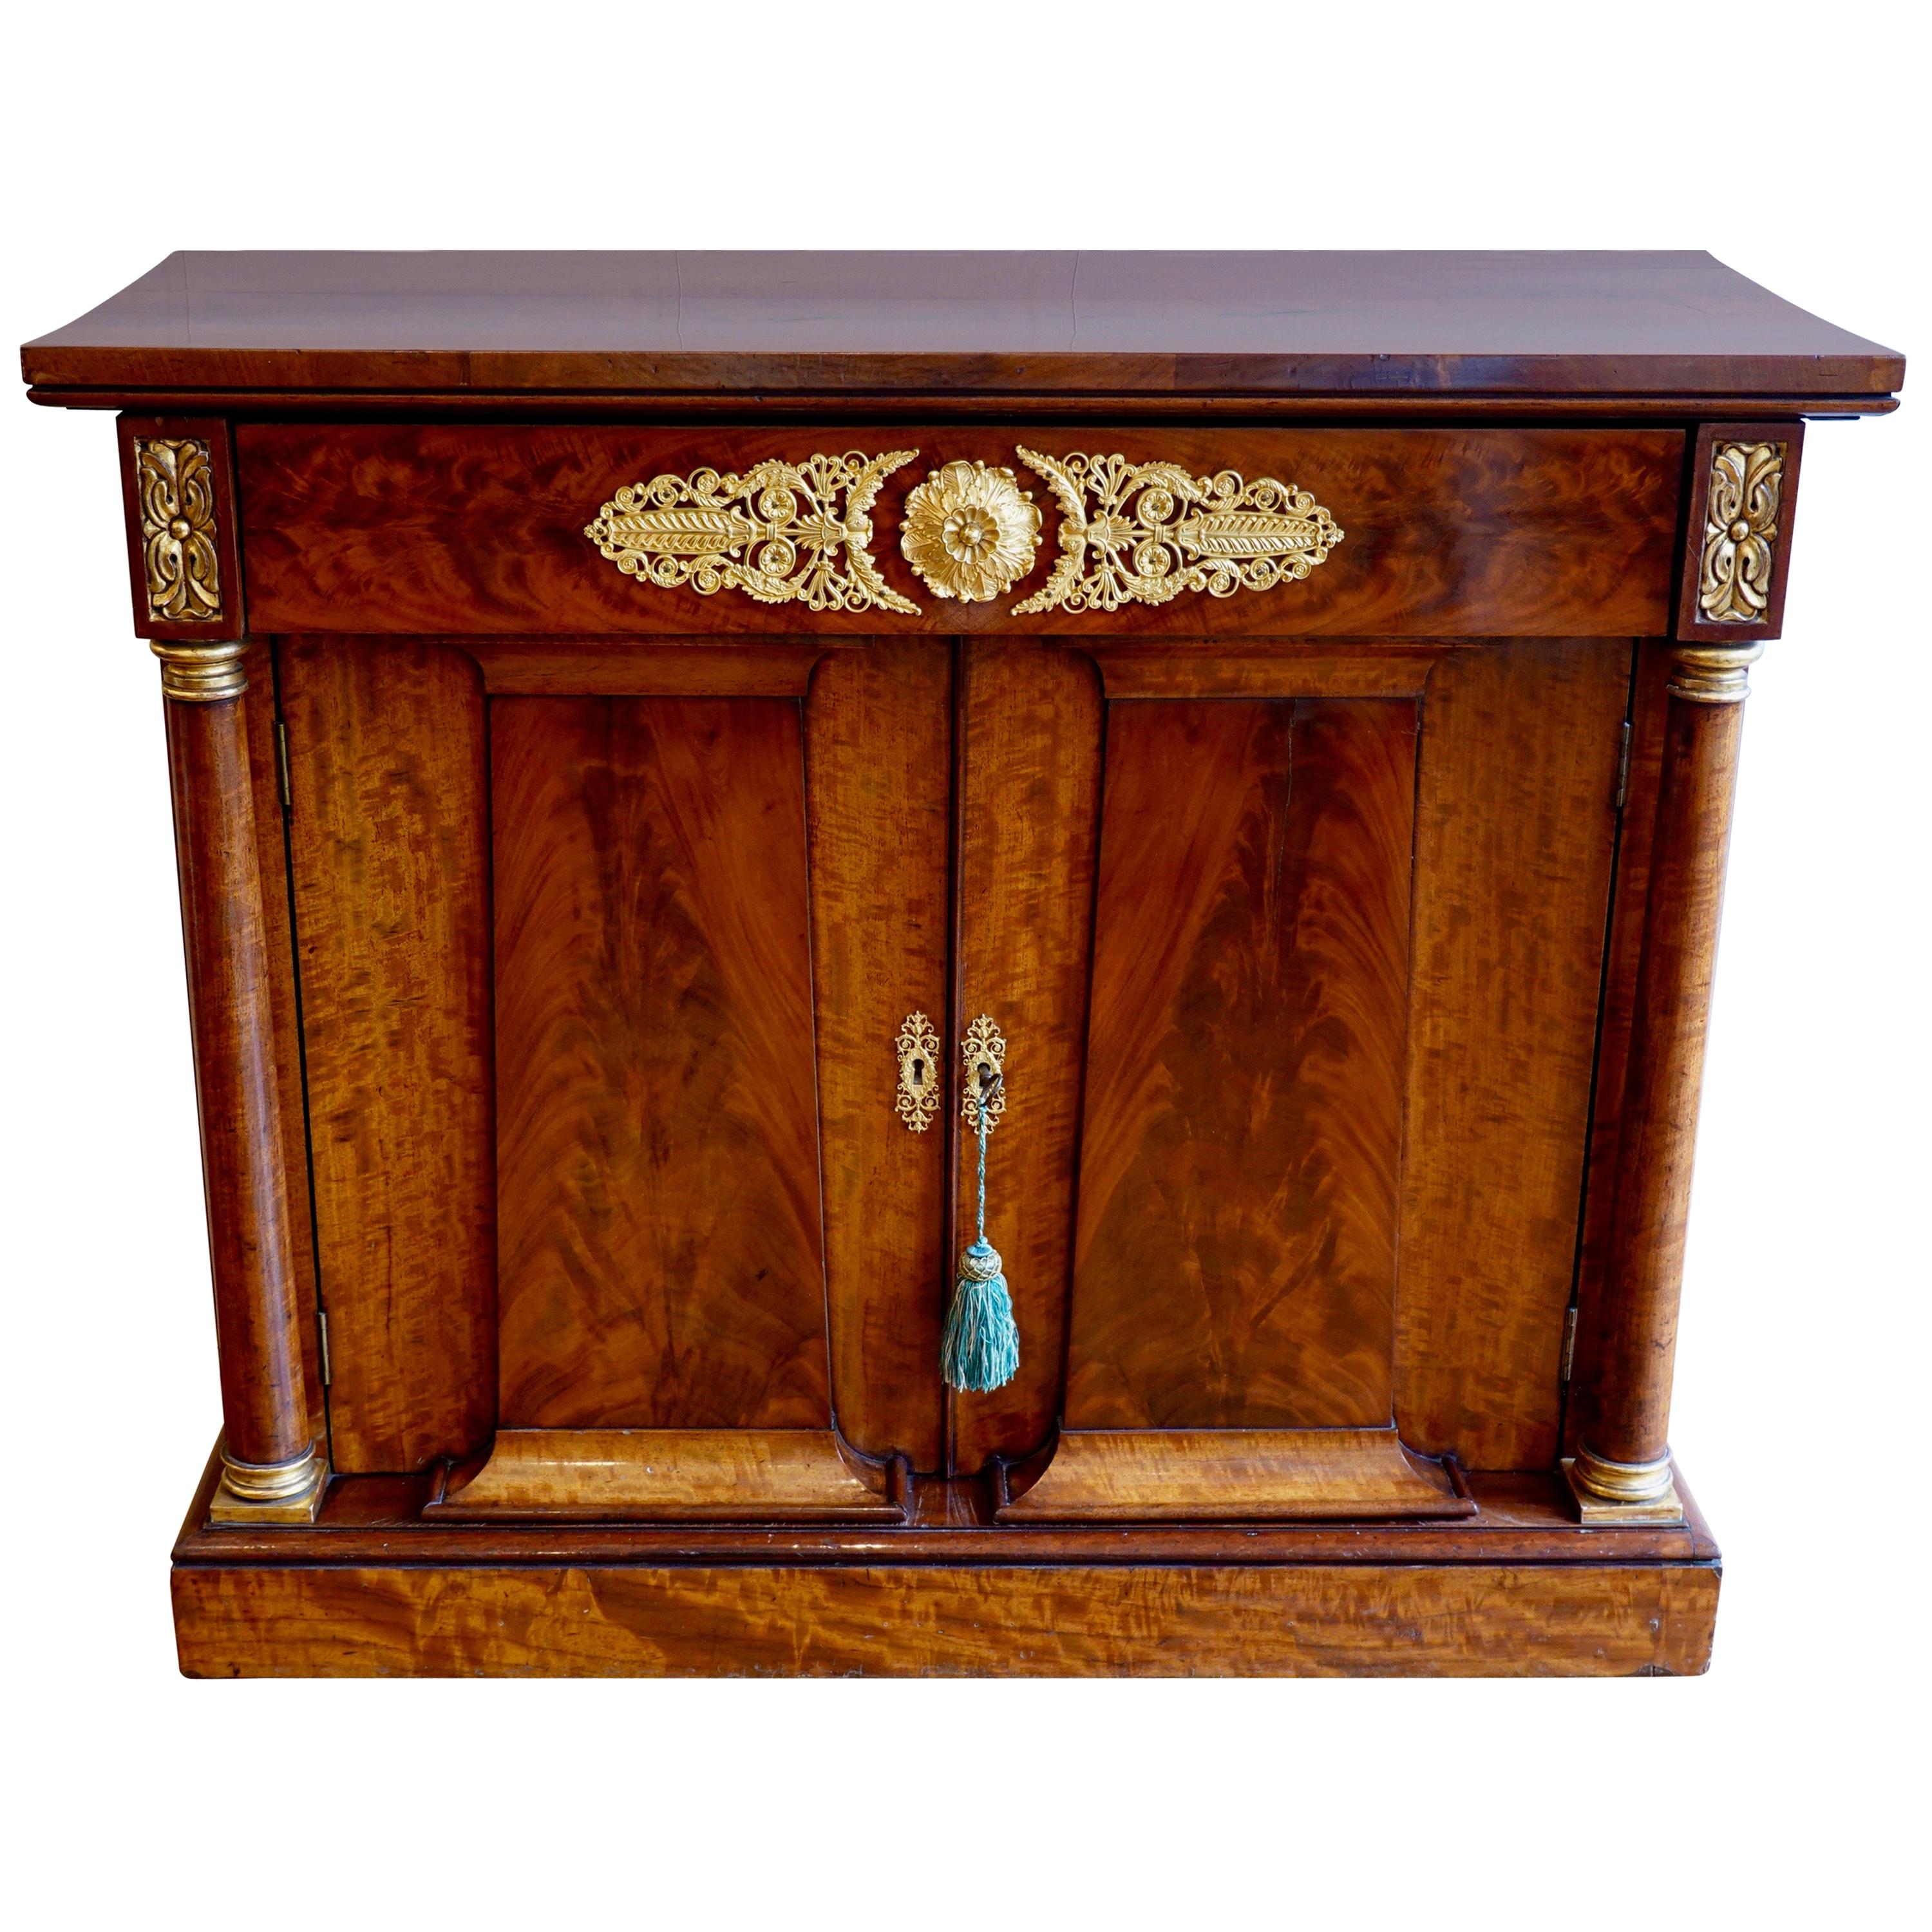 French Empire Period Flame Mahogany and Parcel-Gilt Cabinet